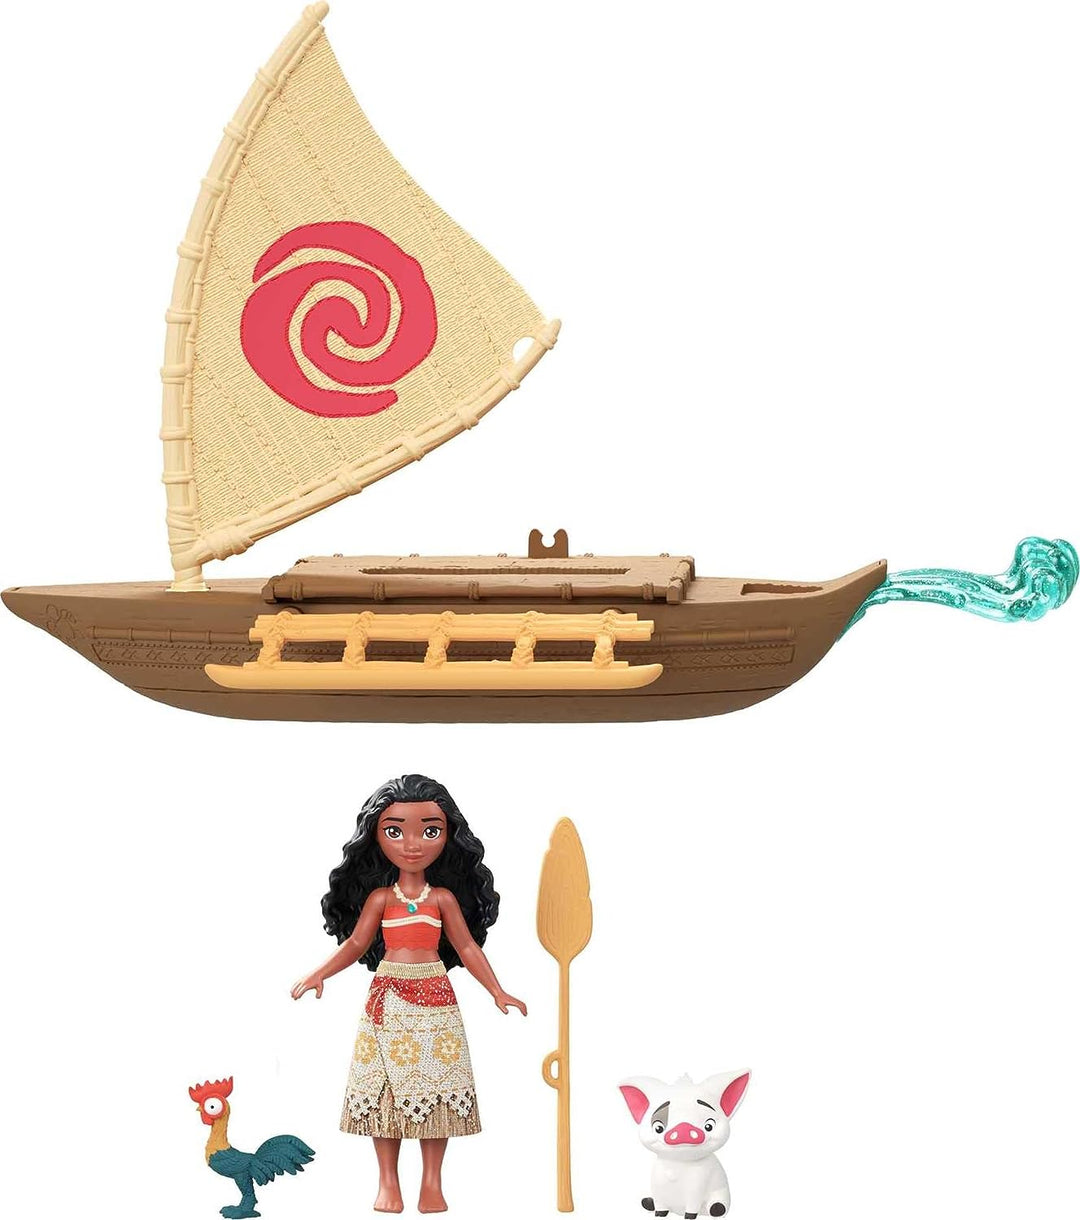 Disney Princess Toys, Moana Small Doll and Floating Boat with 2 Friend Figures